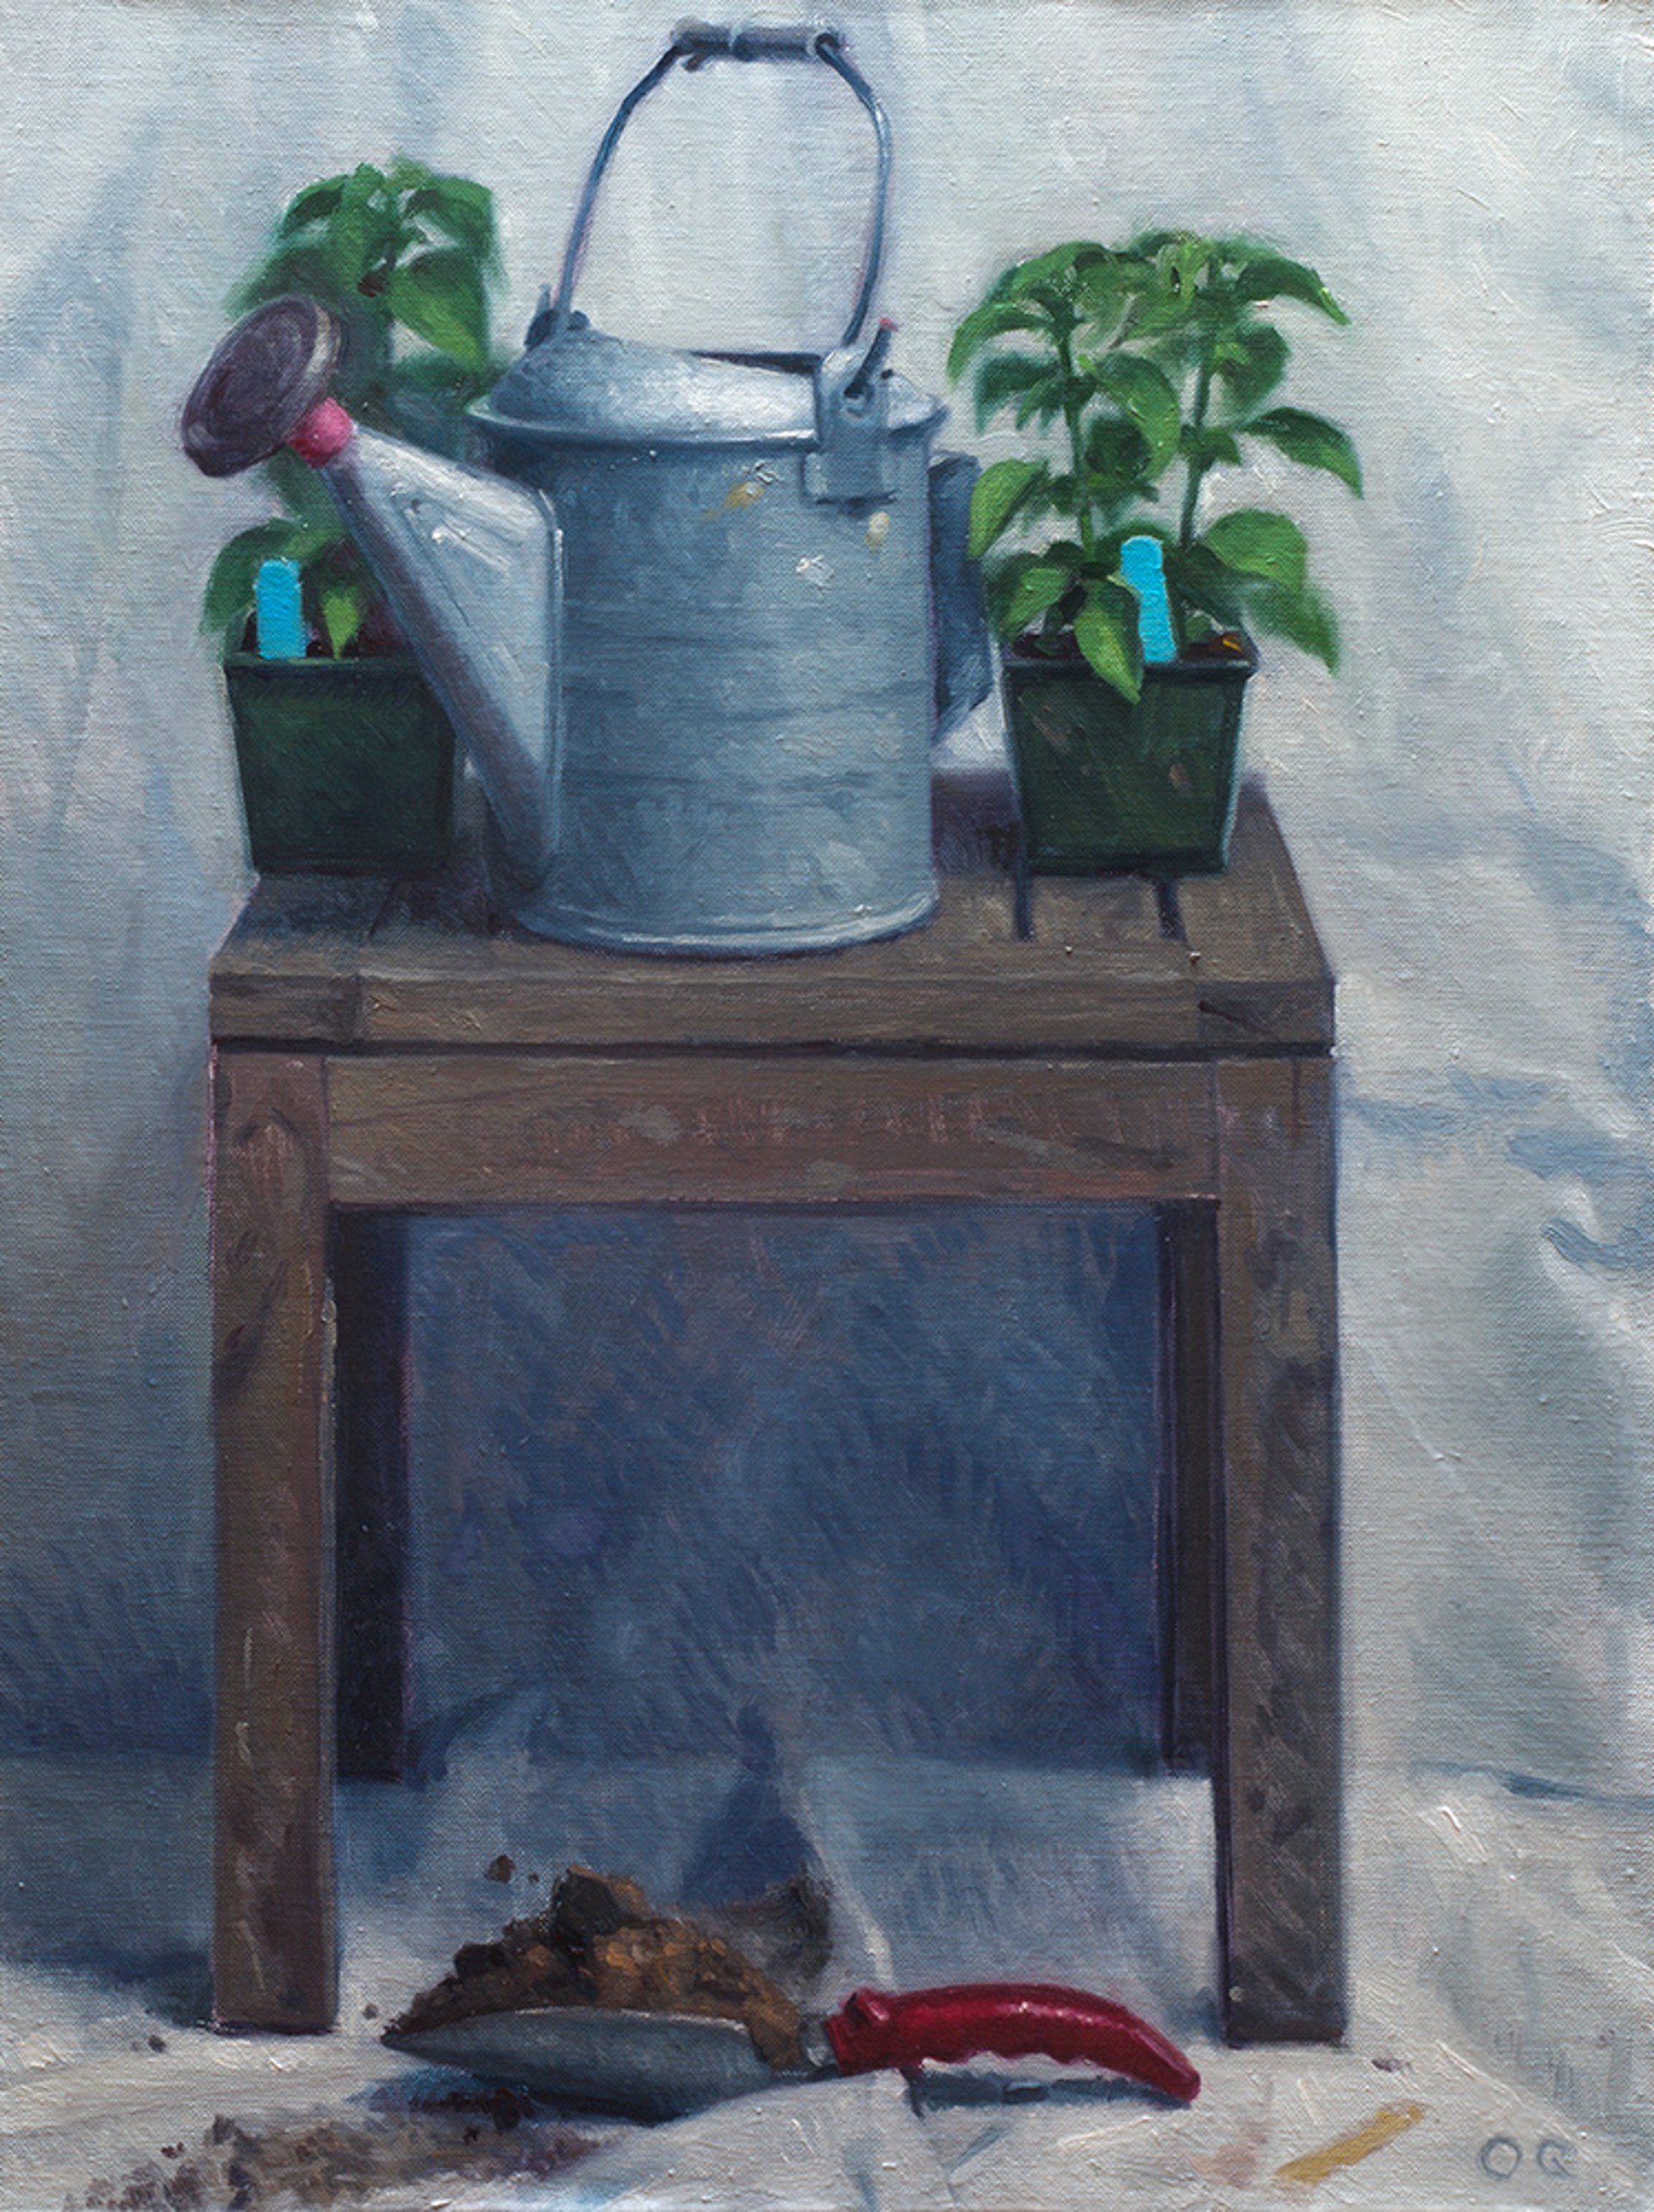 Trowel, Soil, and Watering Can by Ocean Quigley